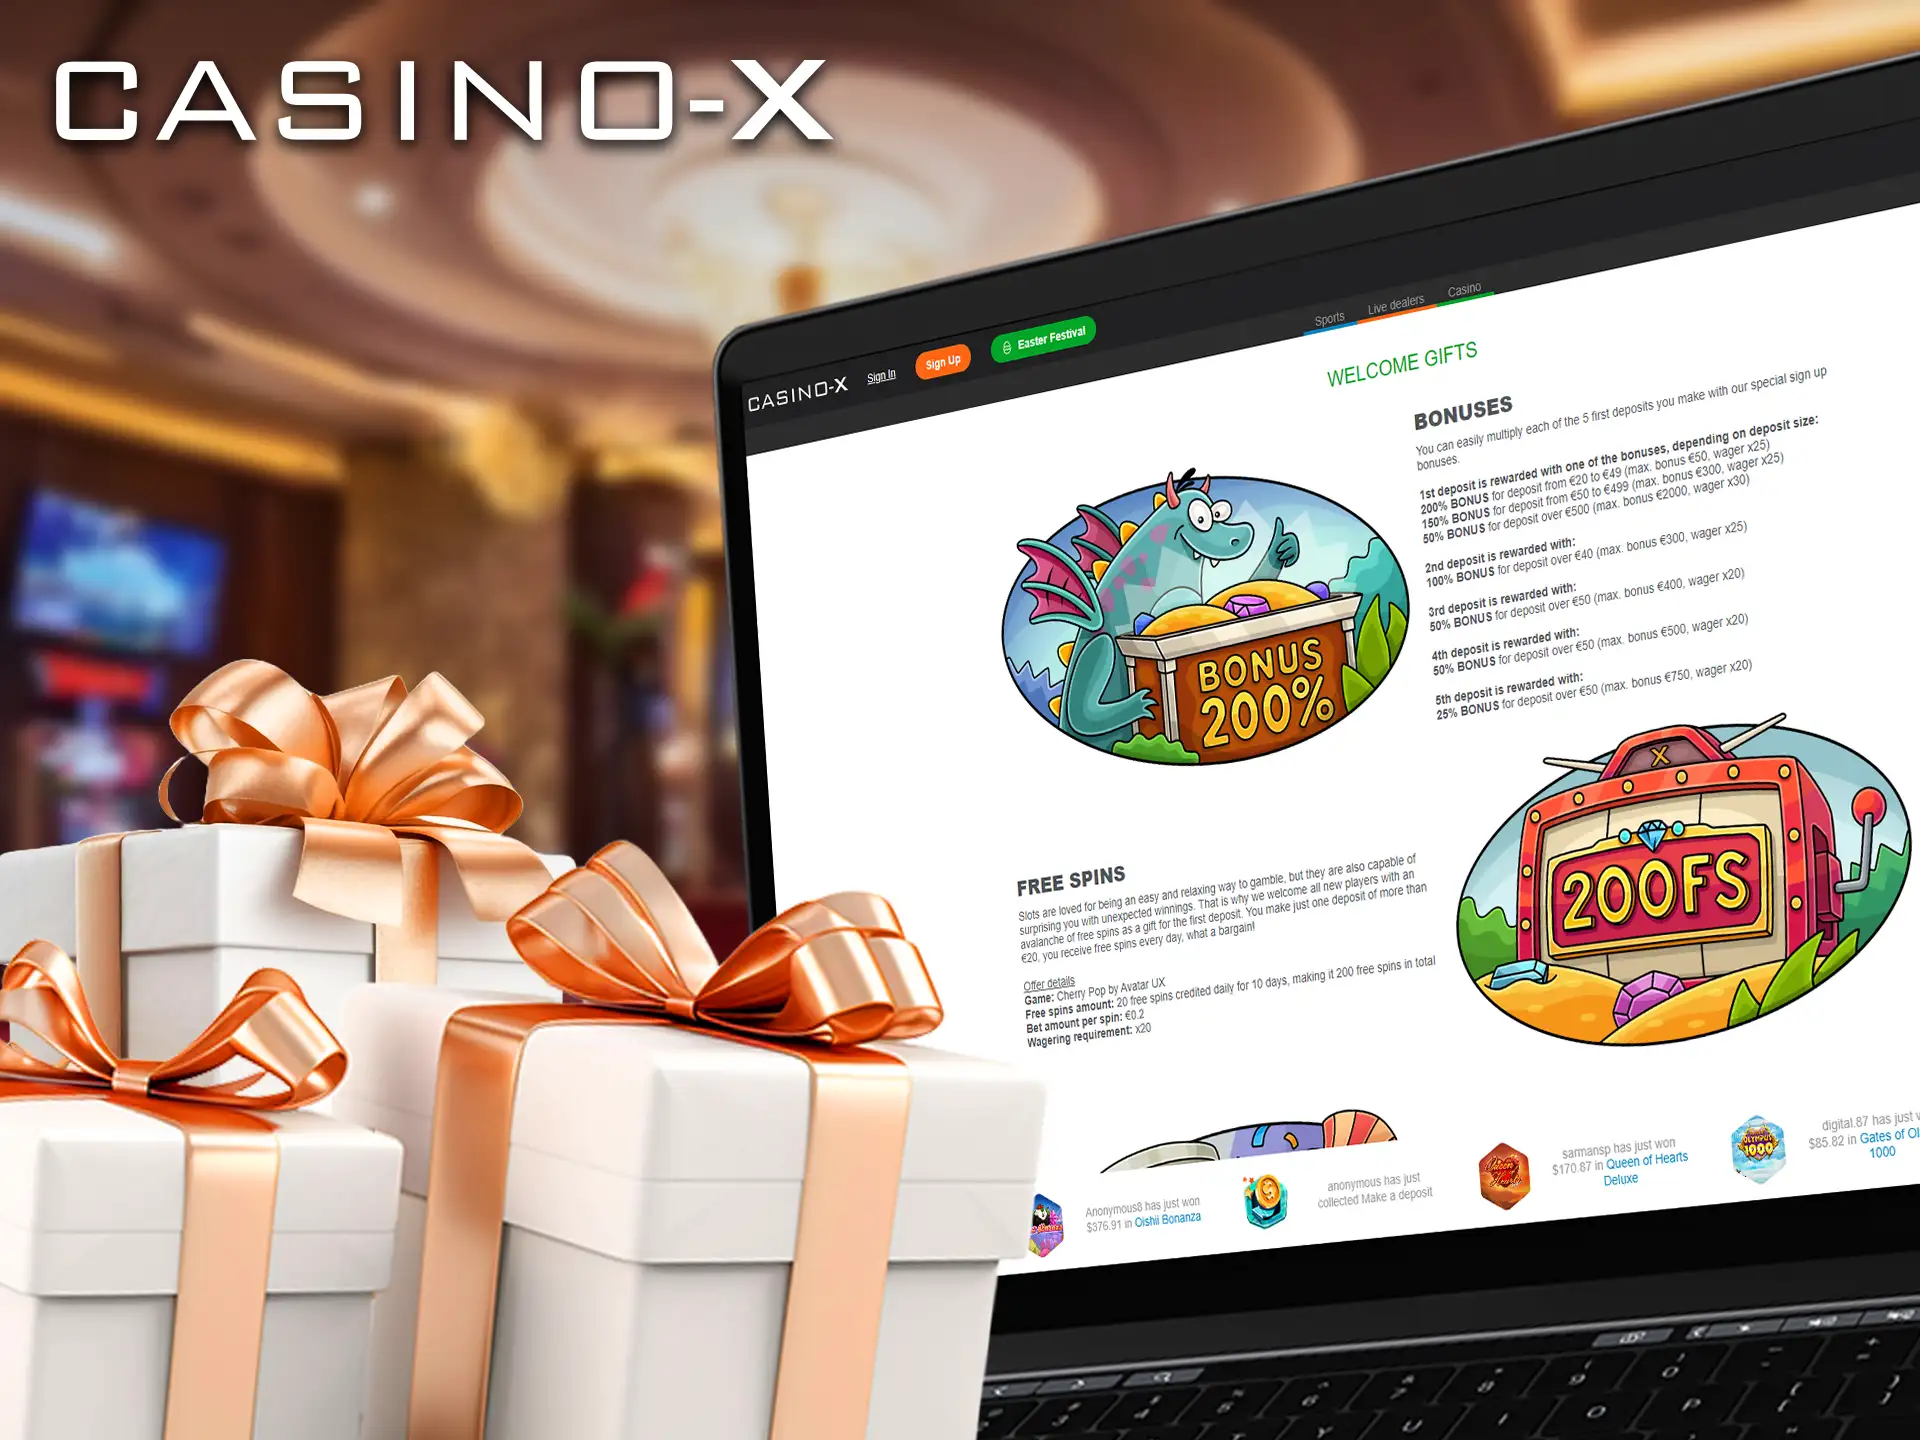 Casino-X welcomes new players with a generous Welcome Bonus, boosting their initial deposit to explore the games.